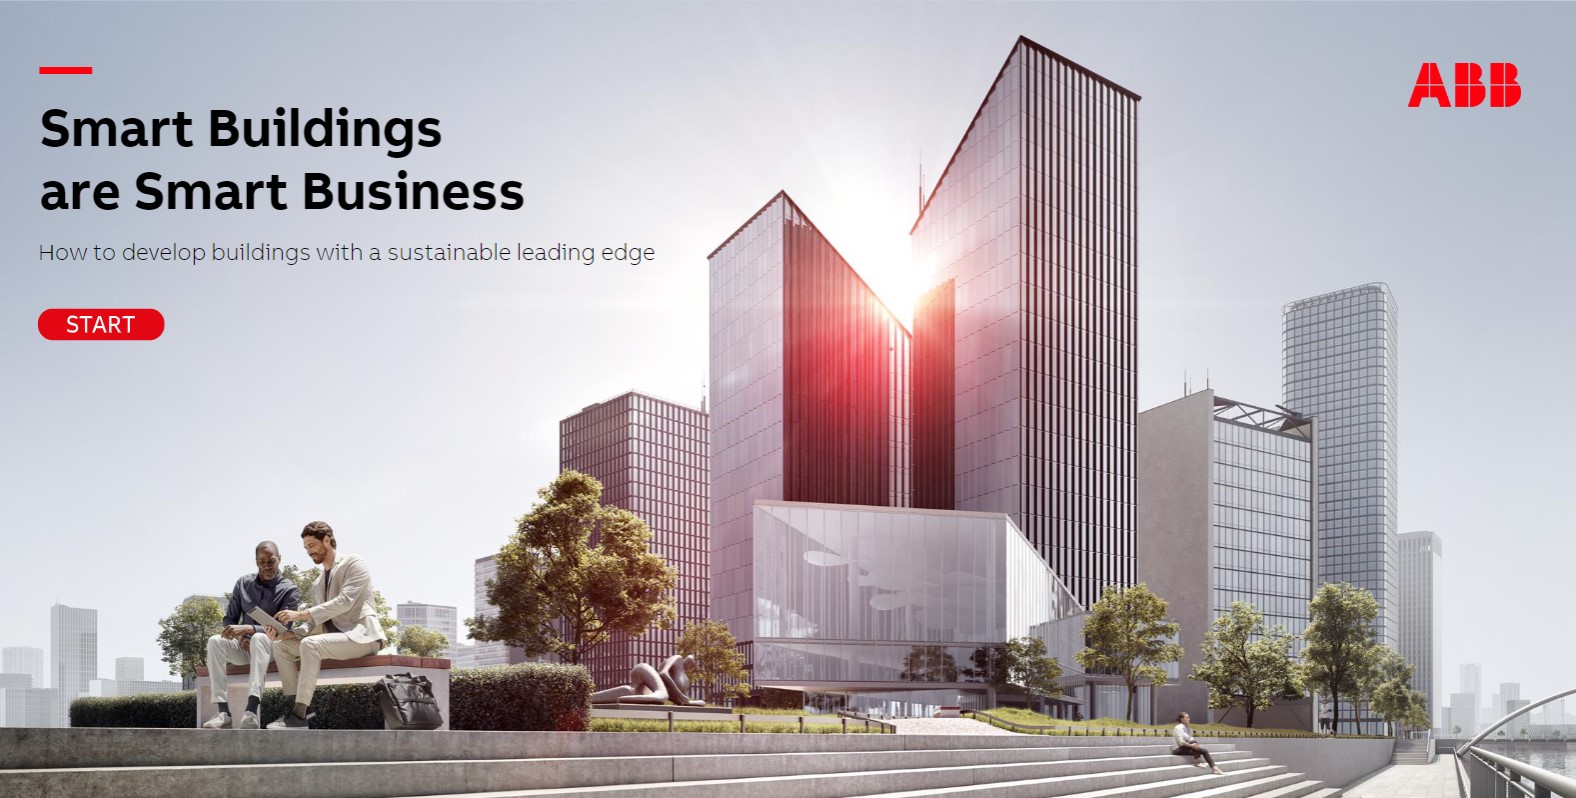 Smart Buildings are Smart Business: how to develop buildings with a sustainable leading edge